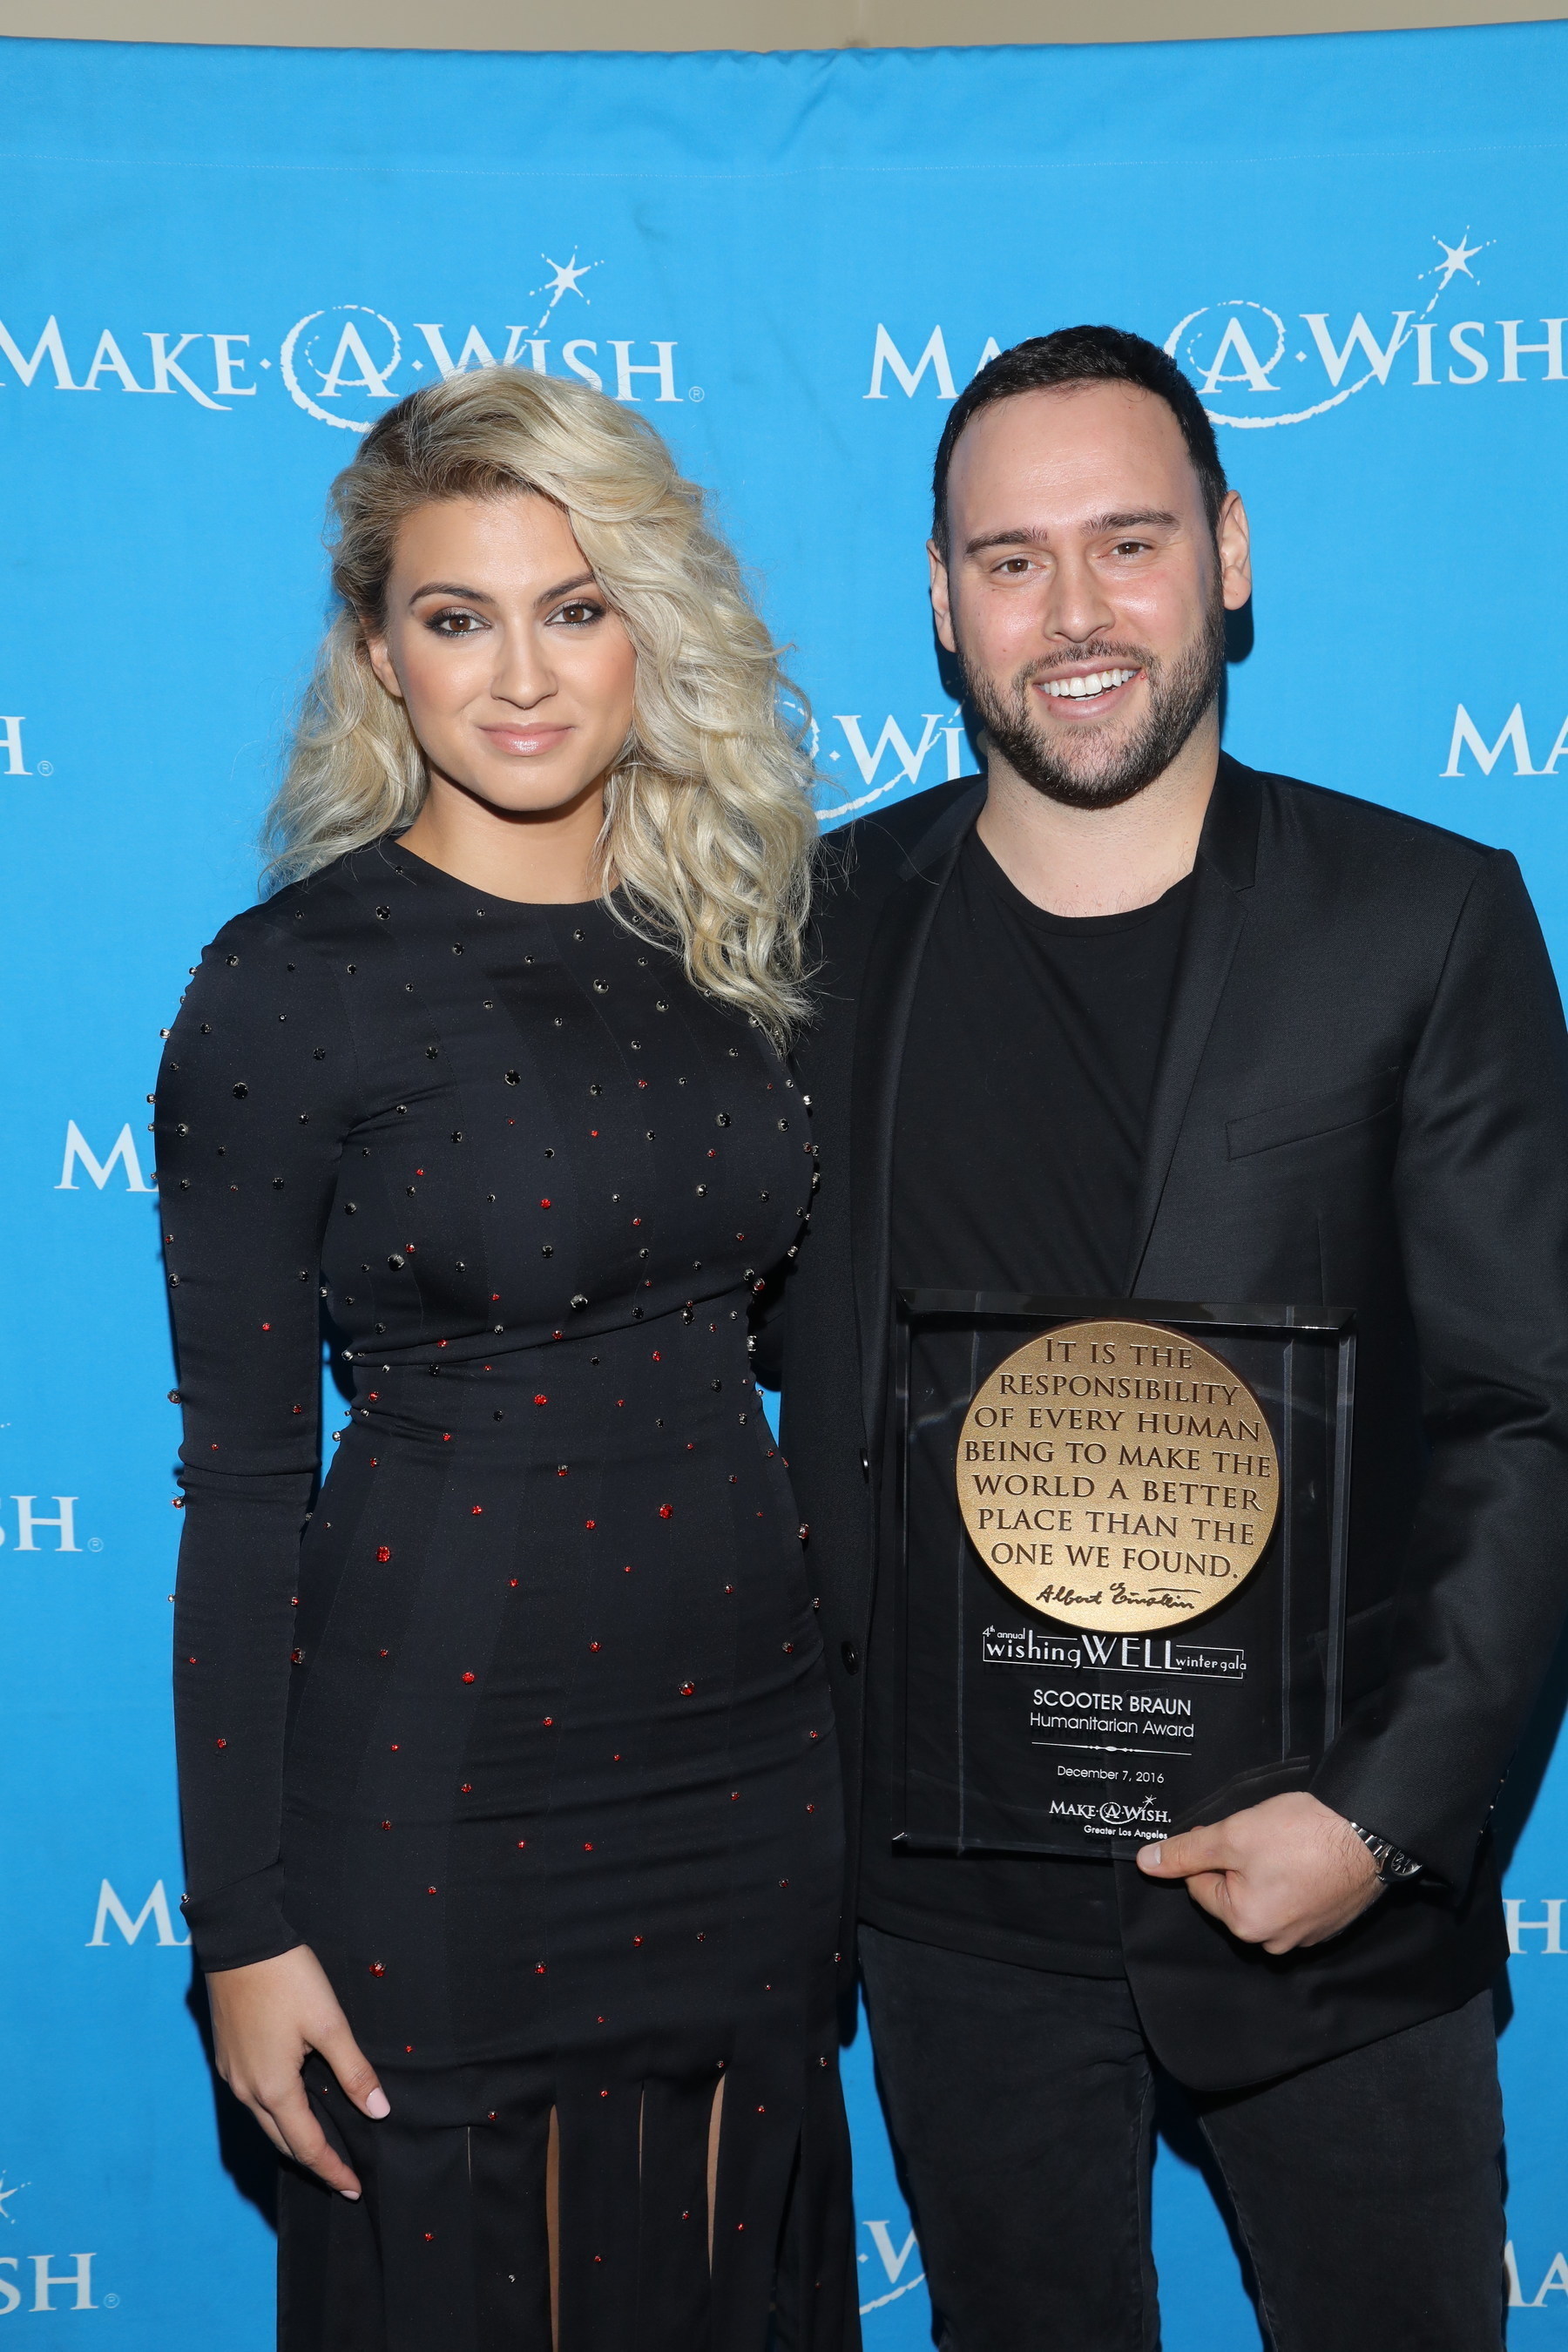 Grammy(R)-nominated singer Tori Kelly presented the Humanitarian Award to entertainment industry power broker and multimedia entrepreneur Scooter Braun. Scooter has granted hundreds of wishes for Make-A-Wish through his talent roster that includes Kelly, Justin Bieber and Ariana Grande, among others. Photo Credit: Craig T. Mathew and Greg Grudt/Mathew Imaging